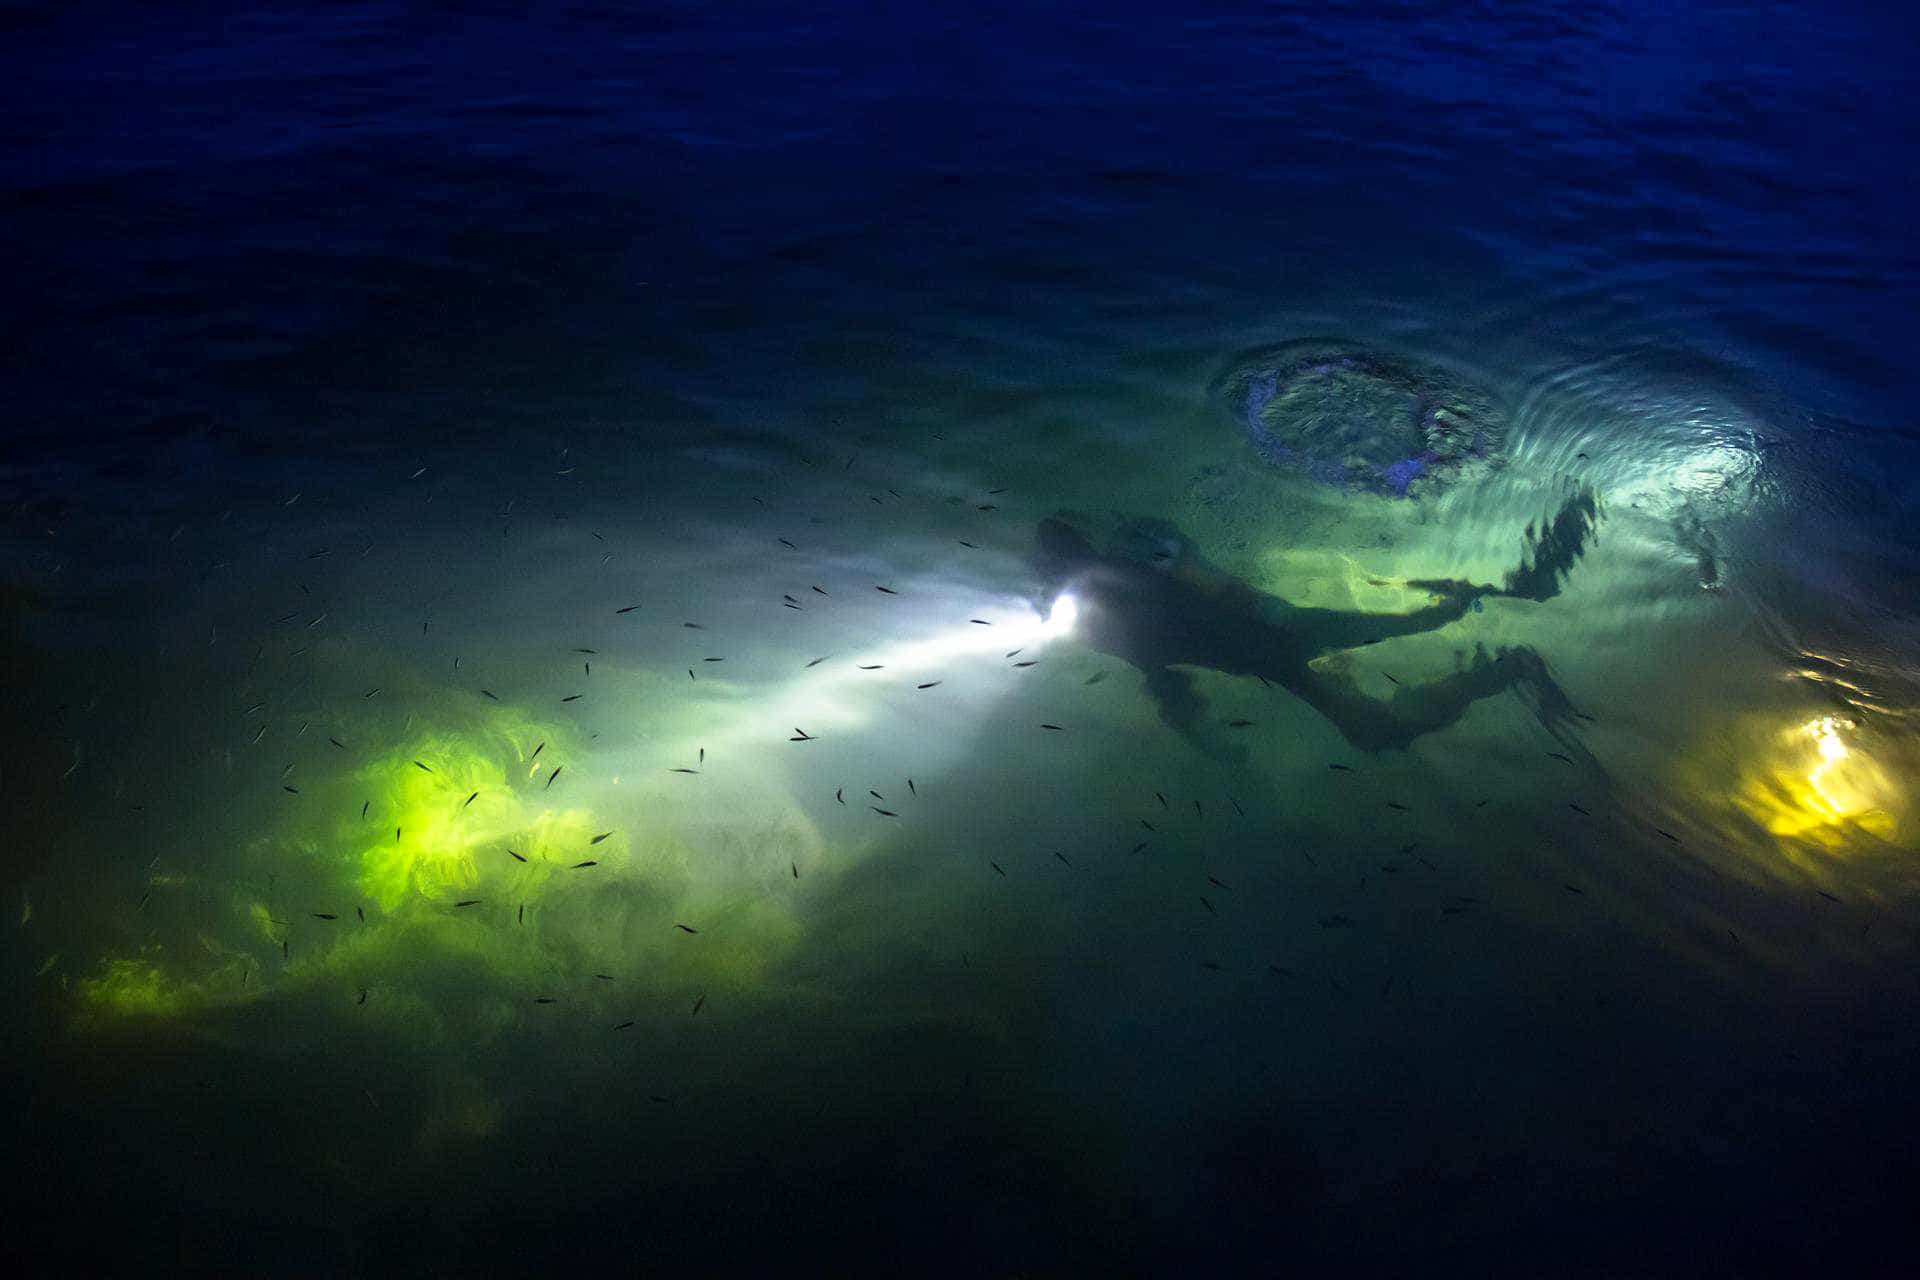 Night diver with lights underwater